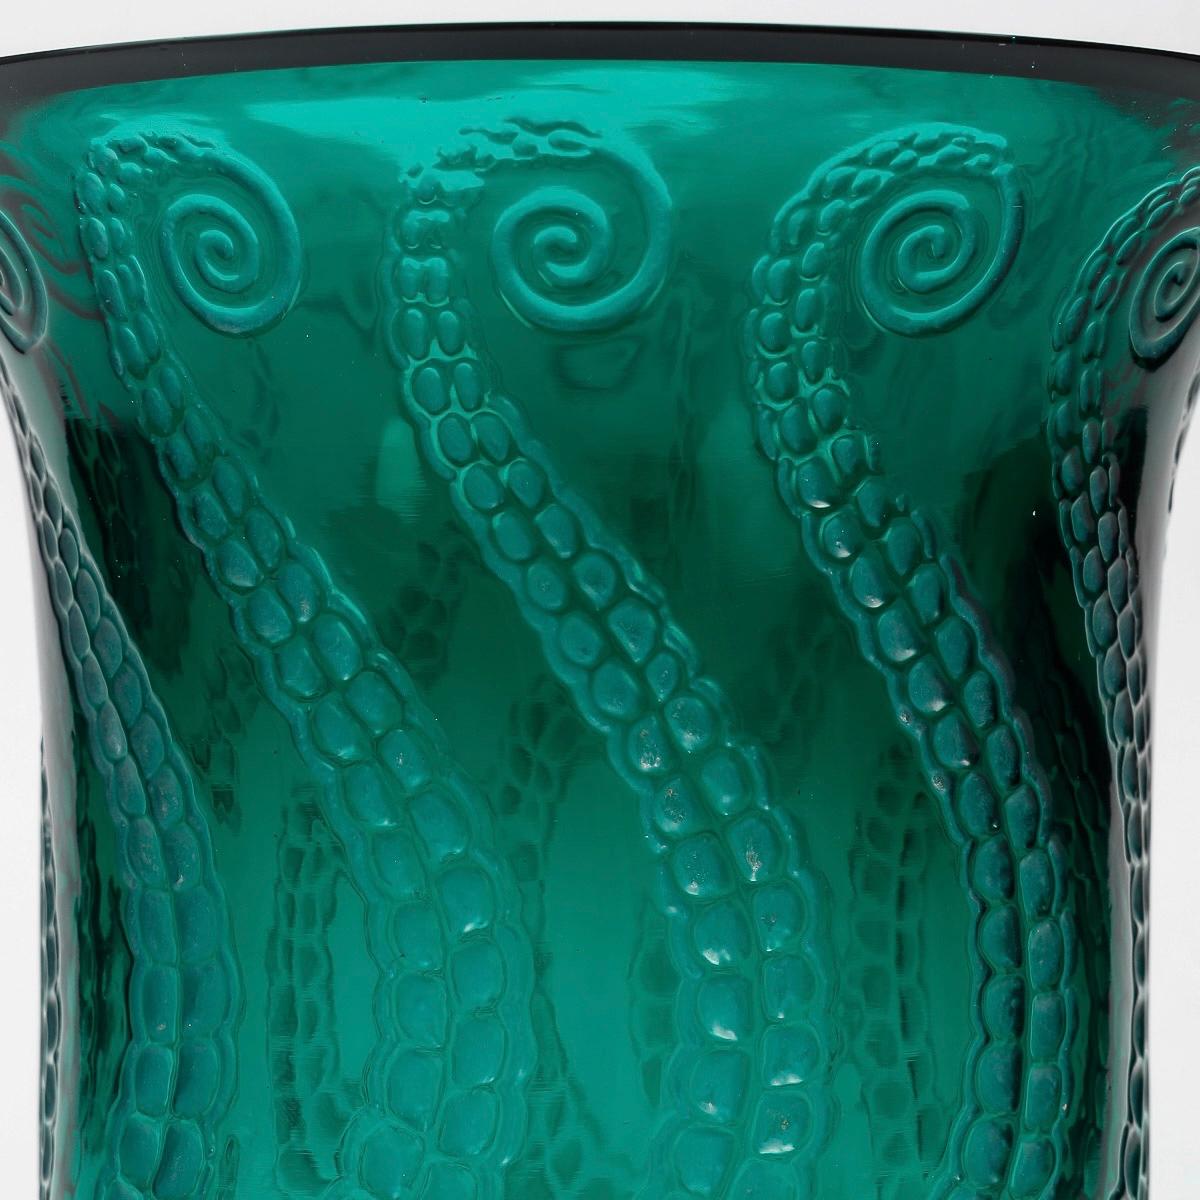 French 1921 Rene Lalique Vase Meduse Emerald Green Glass with White Patina For Sale